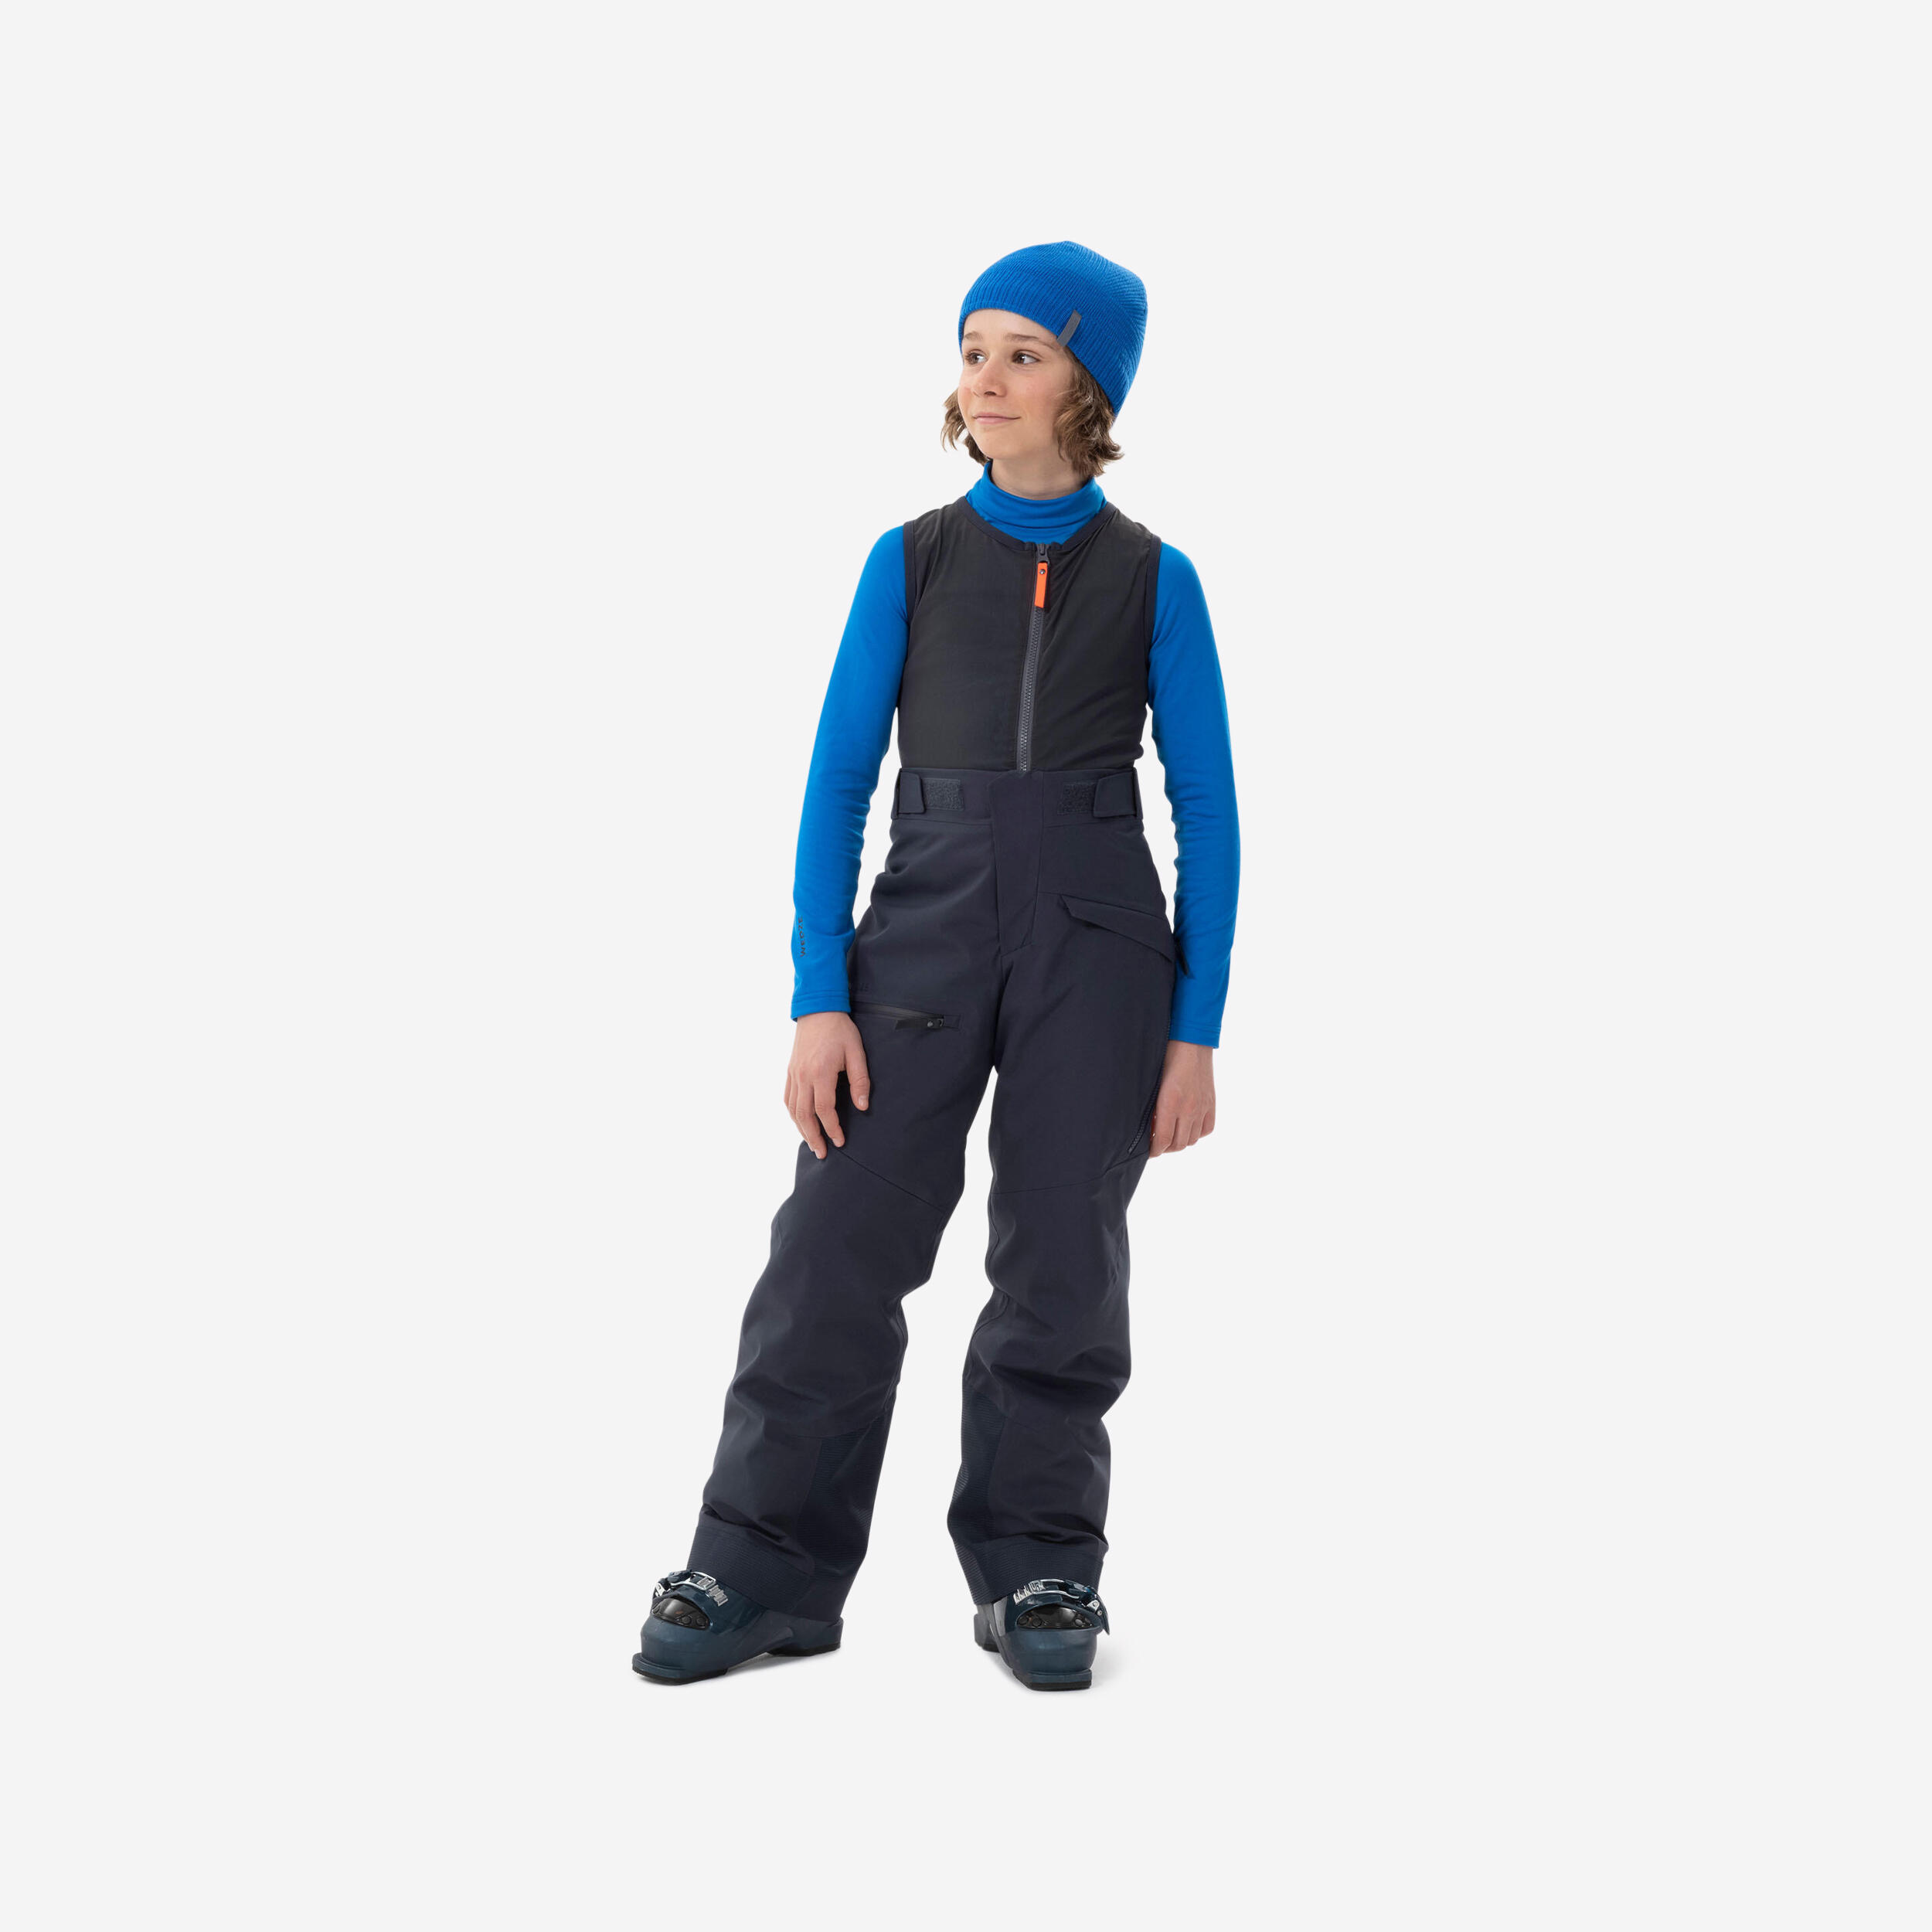 KIDS’ SKI TROUSERS WITH BACK PROTECTOR - FR900 - NAVY BLUE 1/11